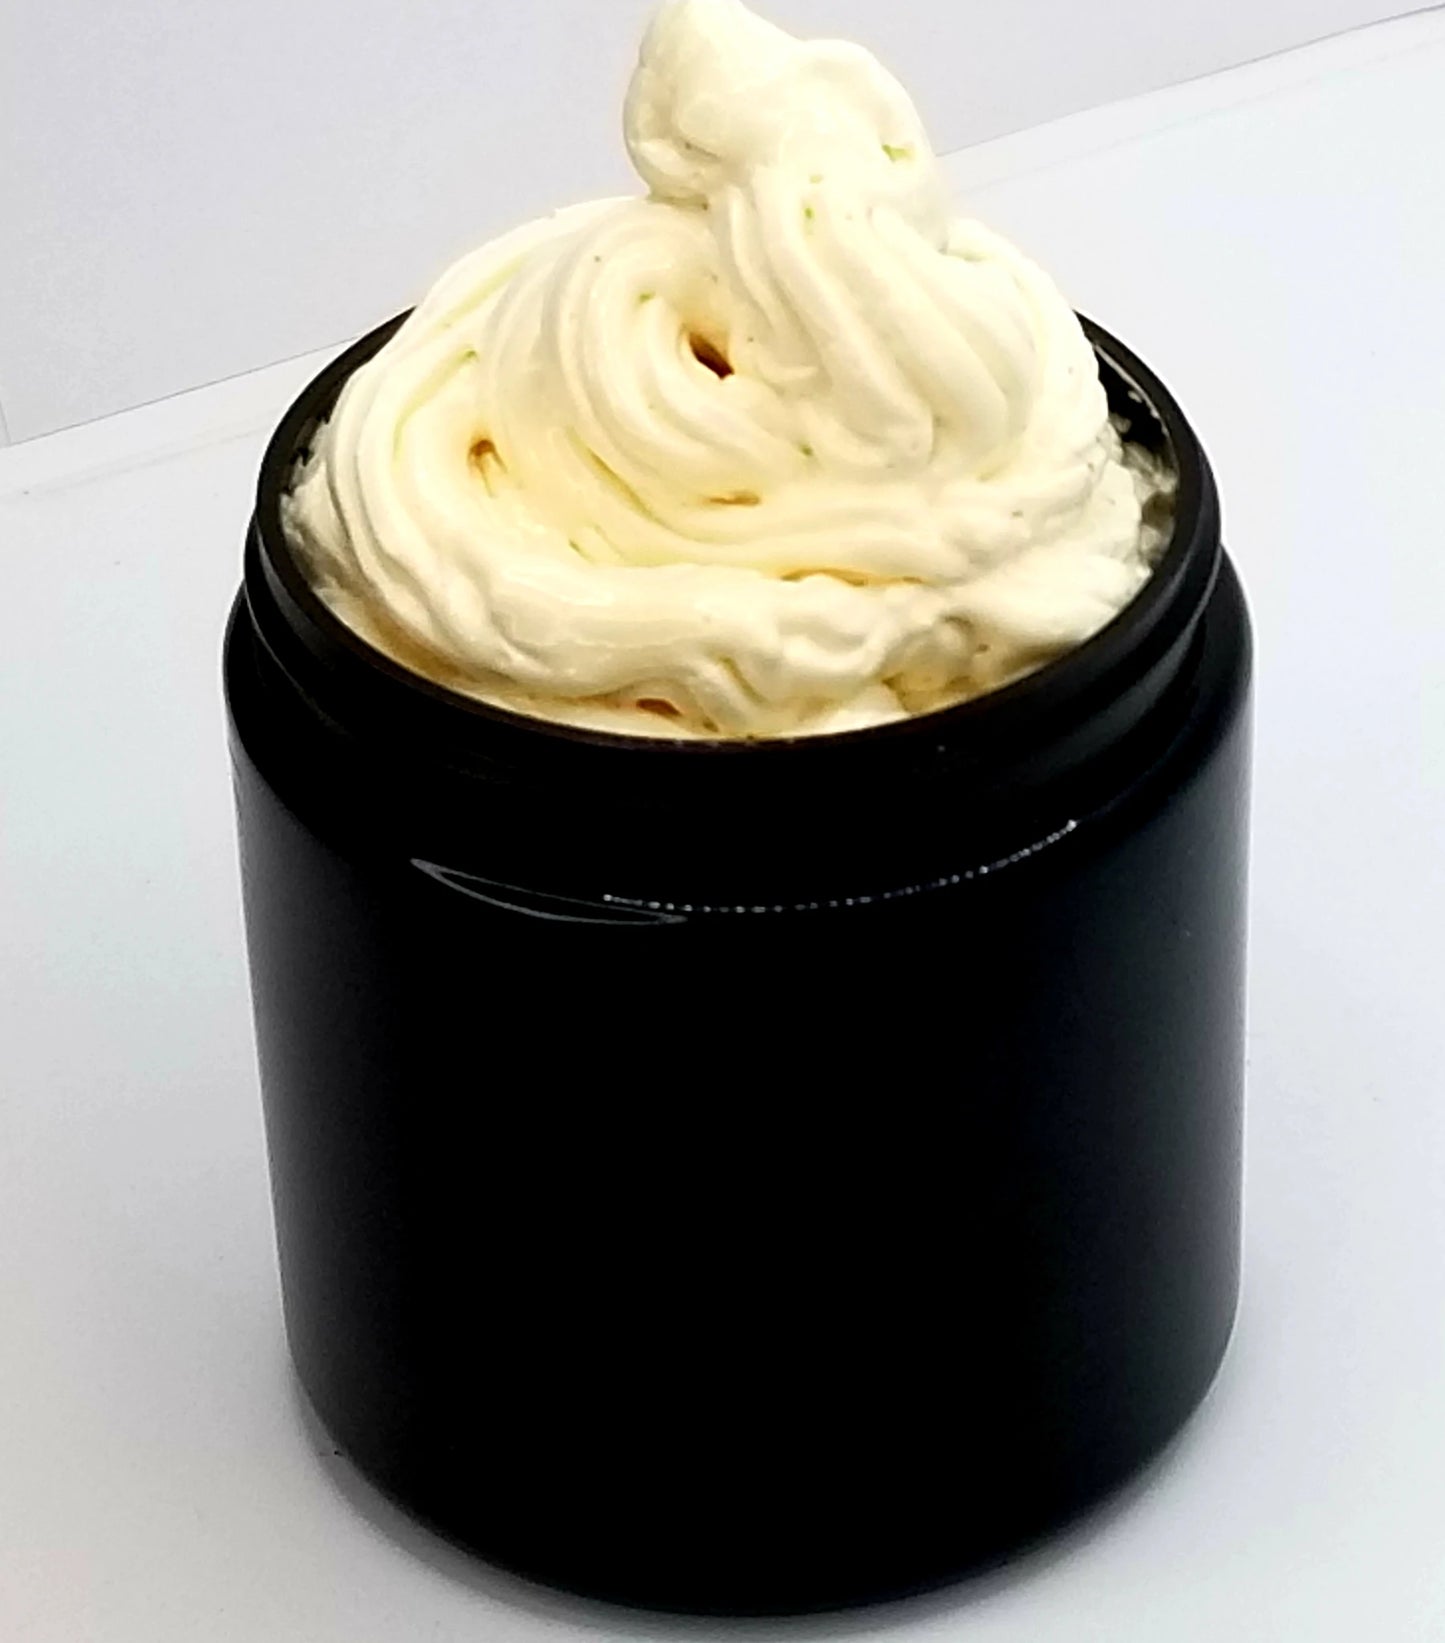 Creed Aventus Inspired for Women Whipped Shea Butter